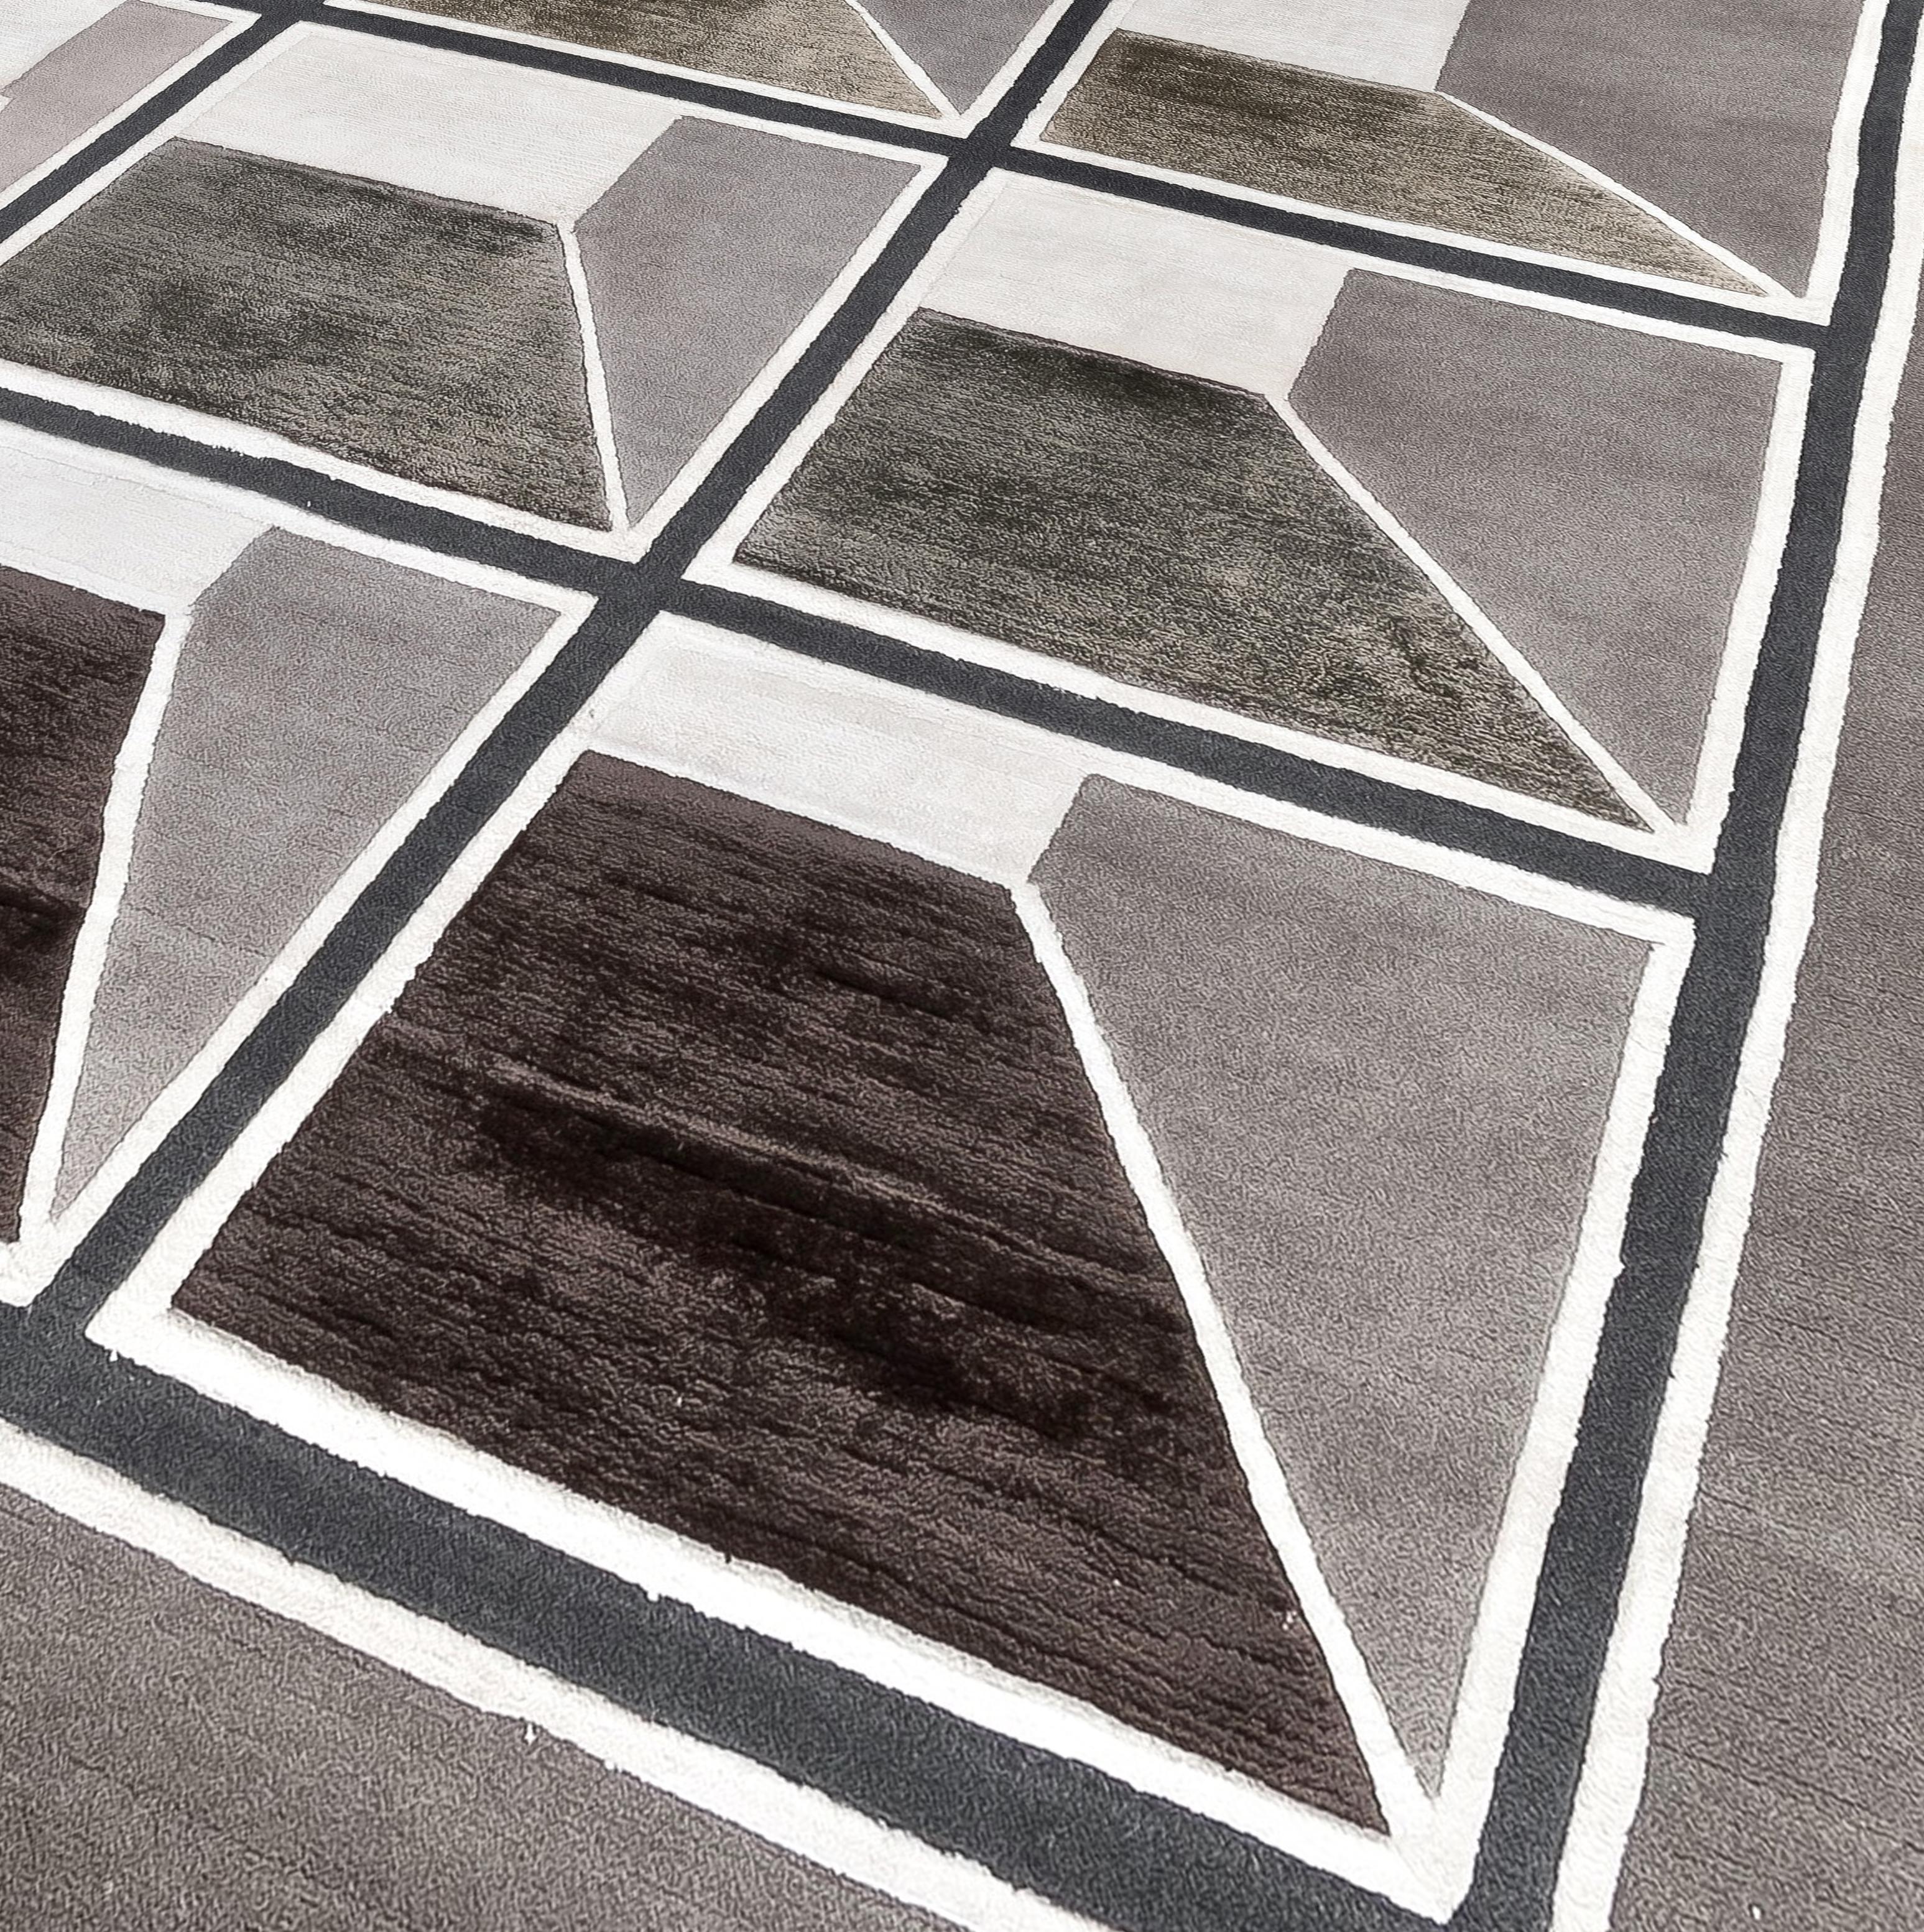 A geometric and concentric structure where it's not clear whether the point of view is from up to down or viceversa.
This rug is hand knotted in Nepal by our artisans by using 50% silk and 50% fine Himalayan wool dyed using vegetable and mineral